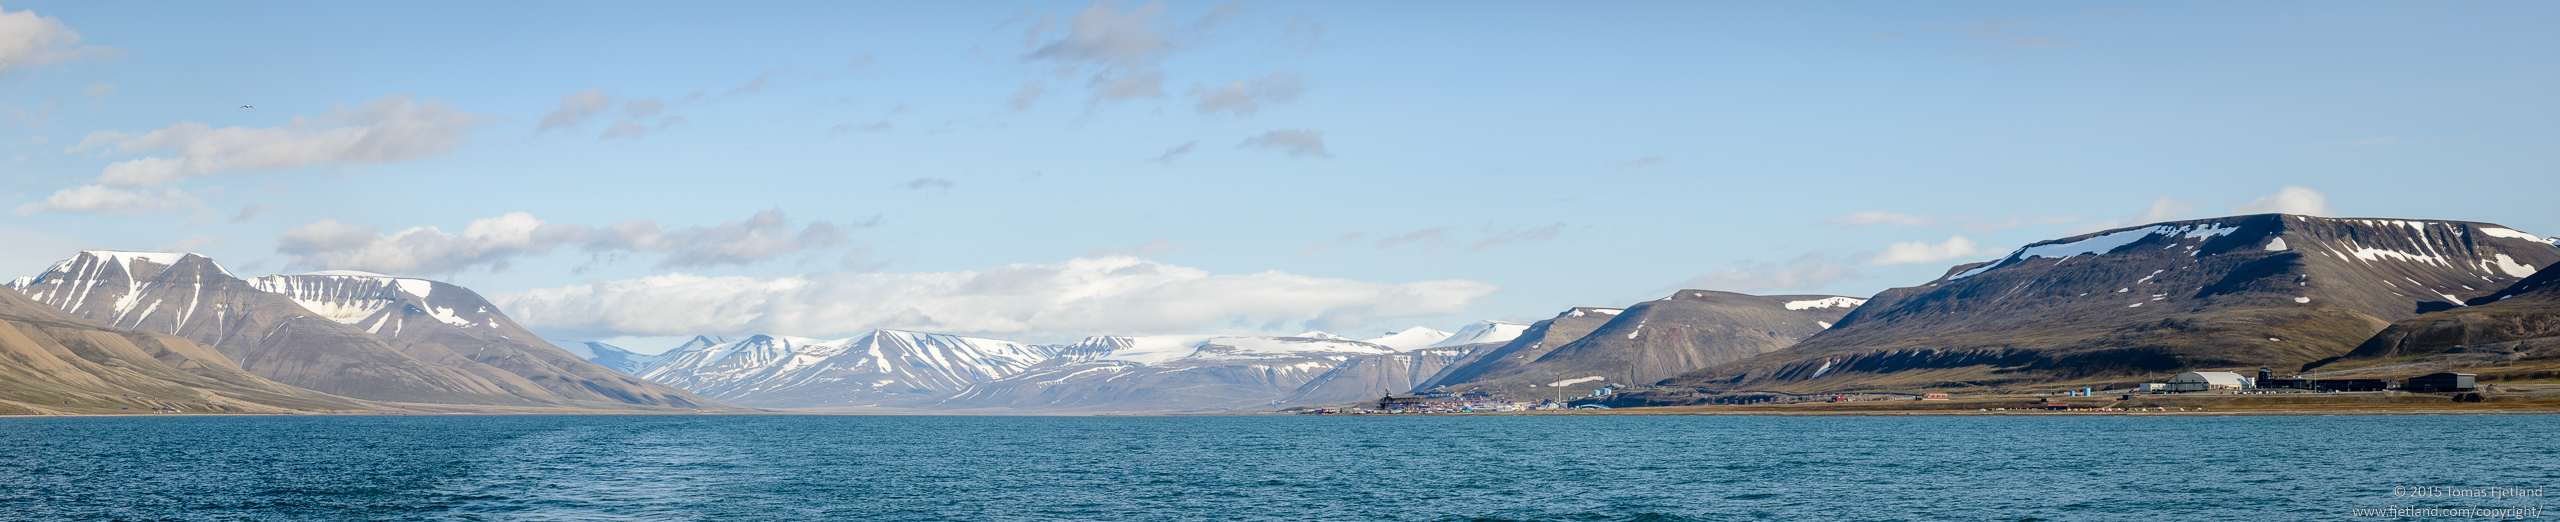 Panorama view of Adventbukta with Longyearbyen just to the right of the middle and Longyearbyen airport in the far right of the frame